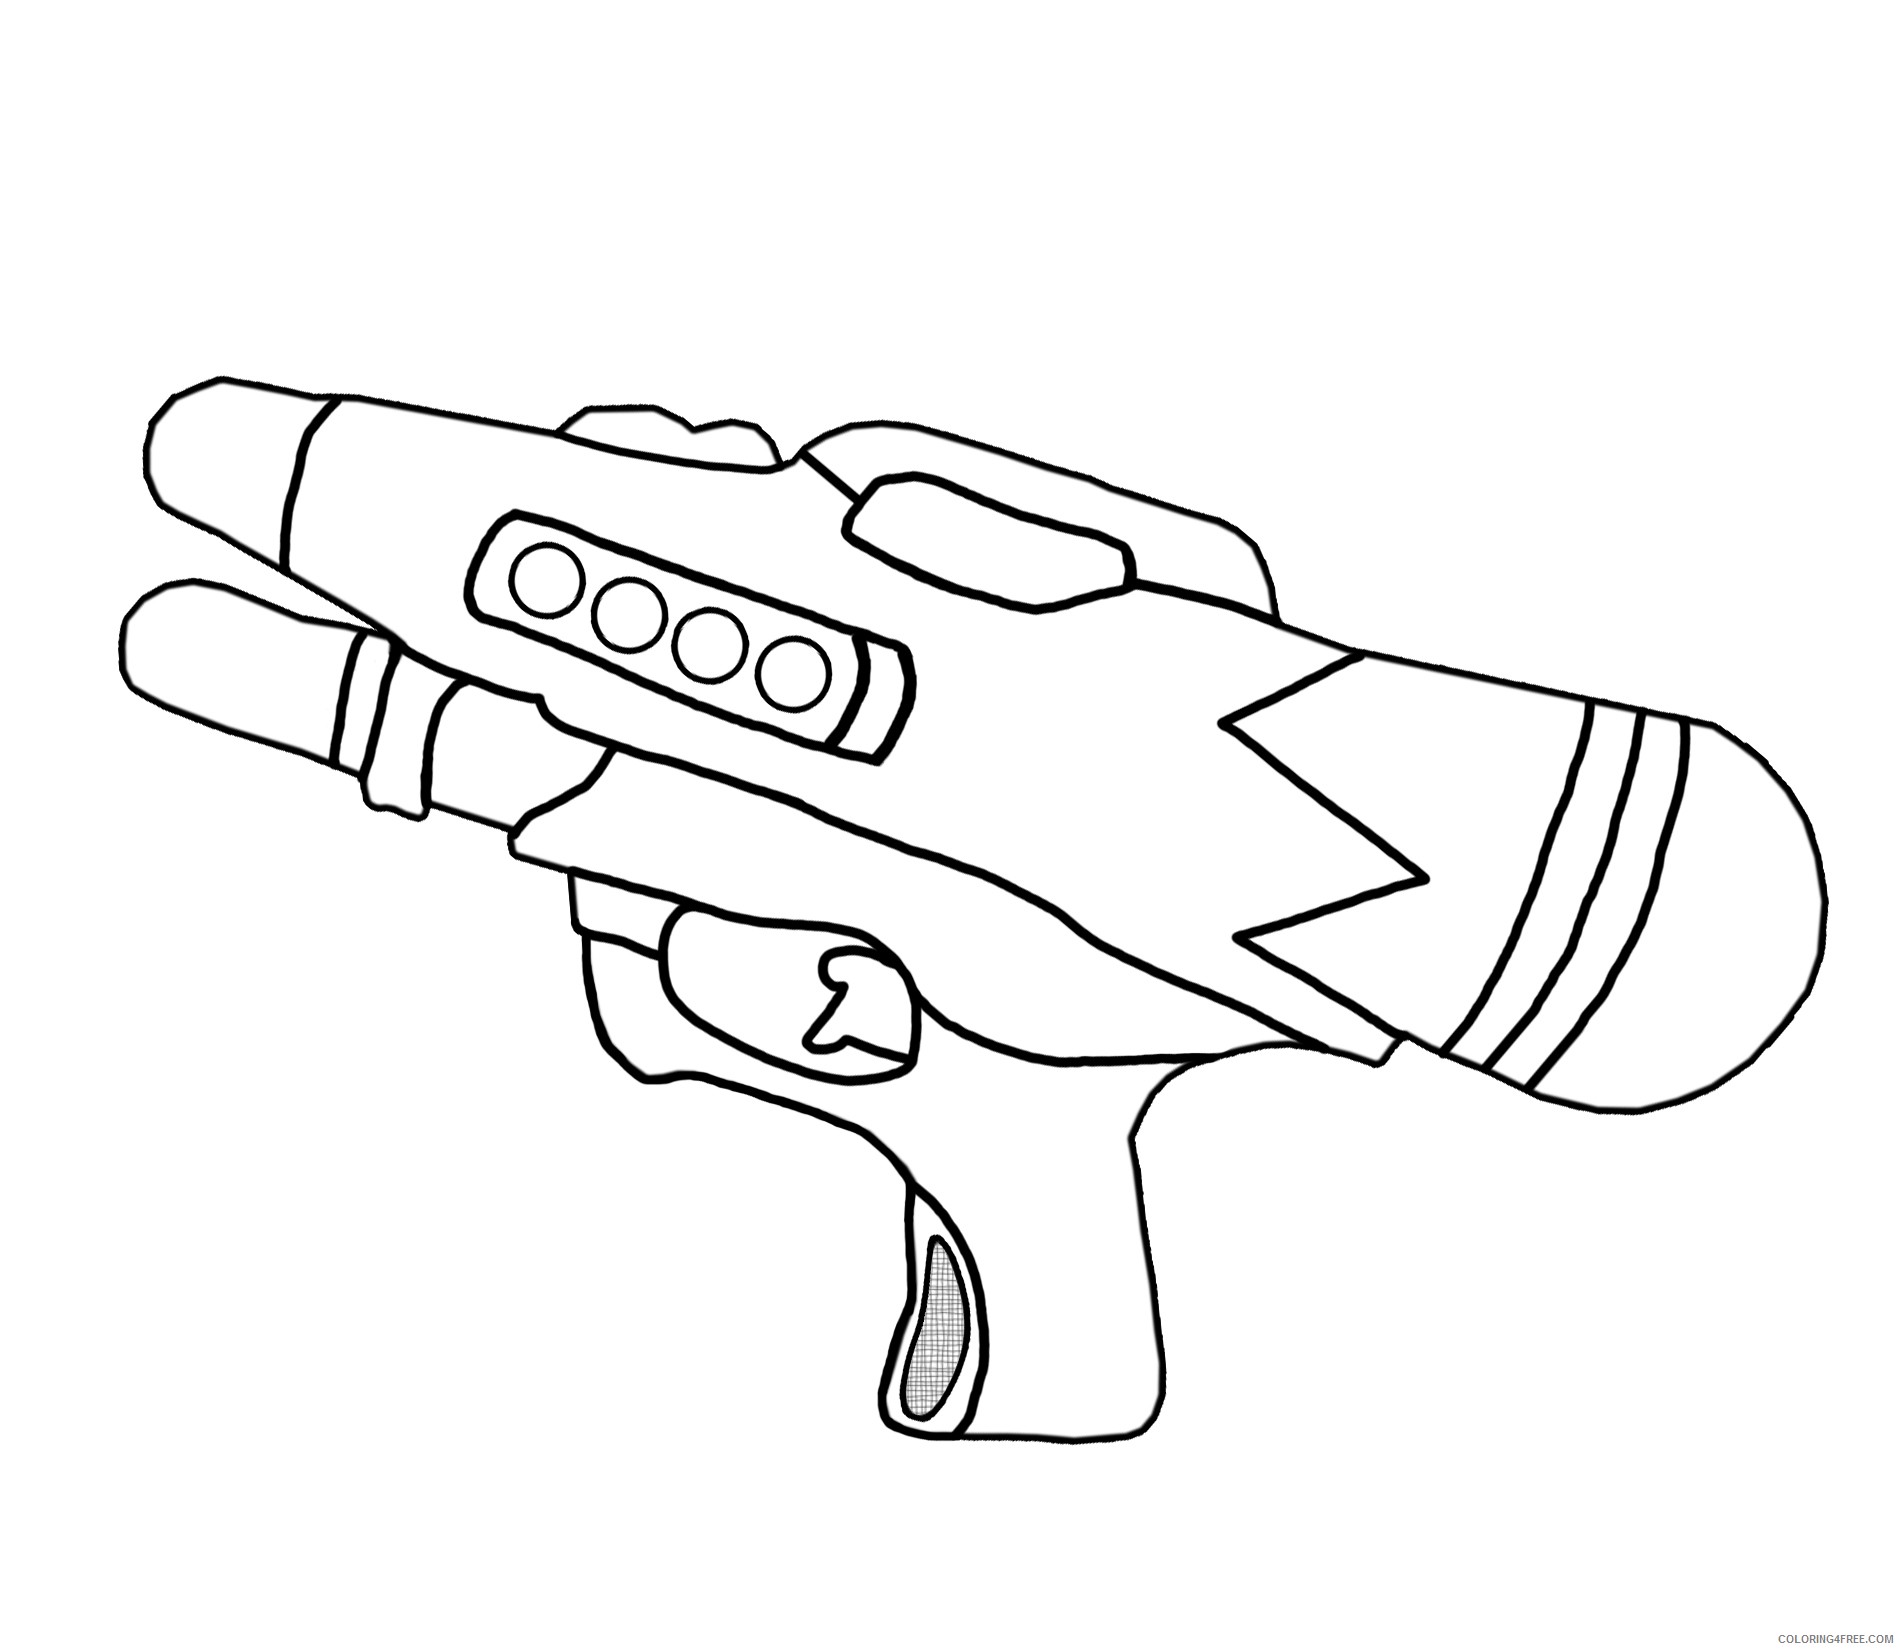 water gun coloring pages for kids Coloring4free